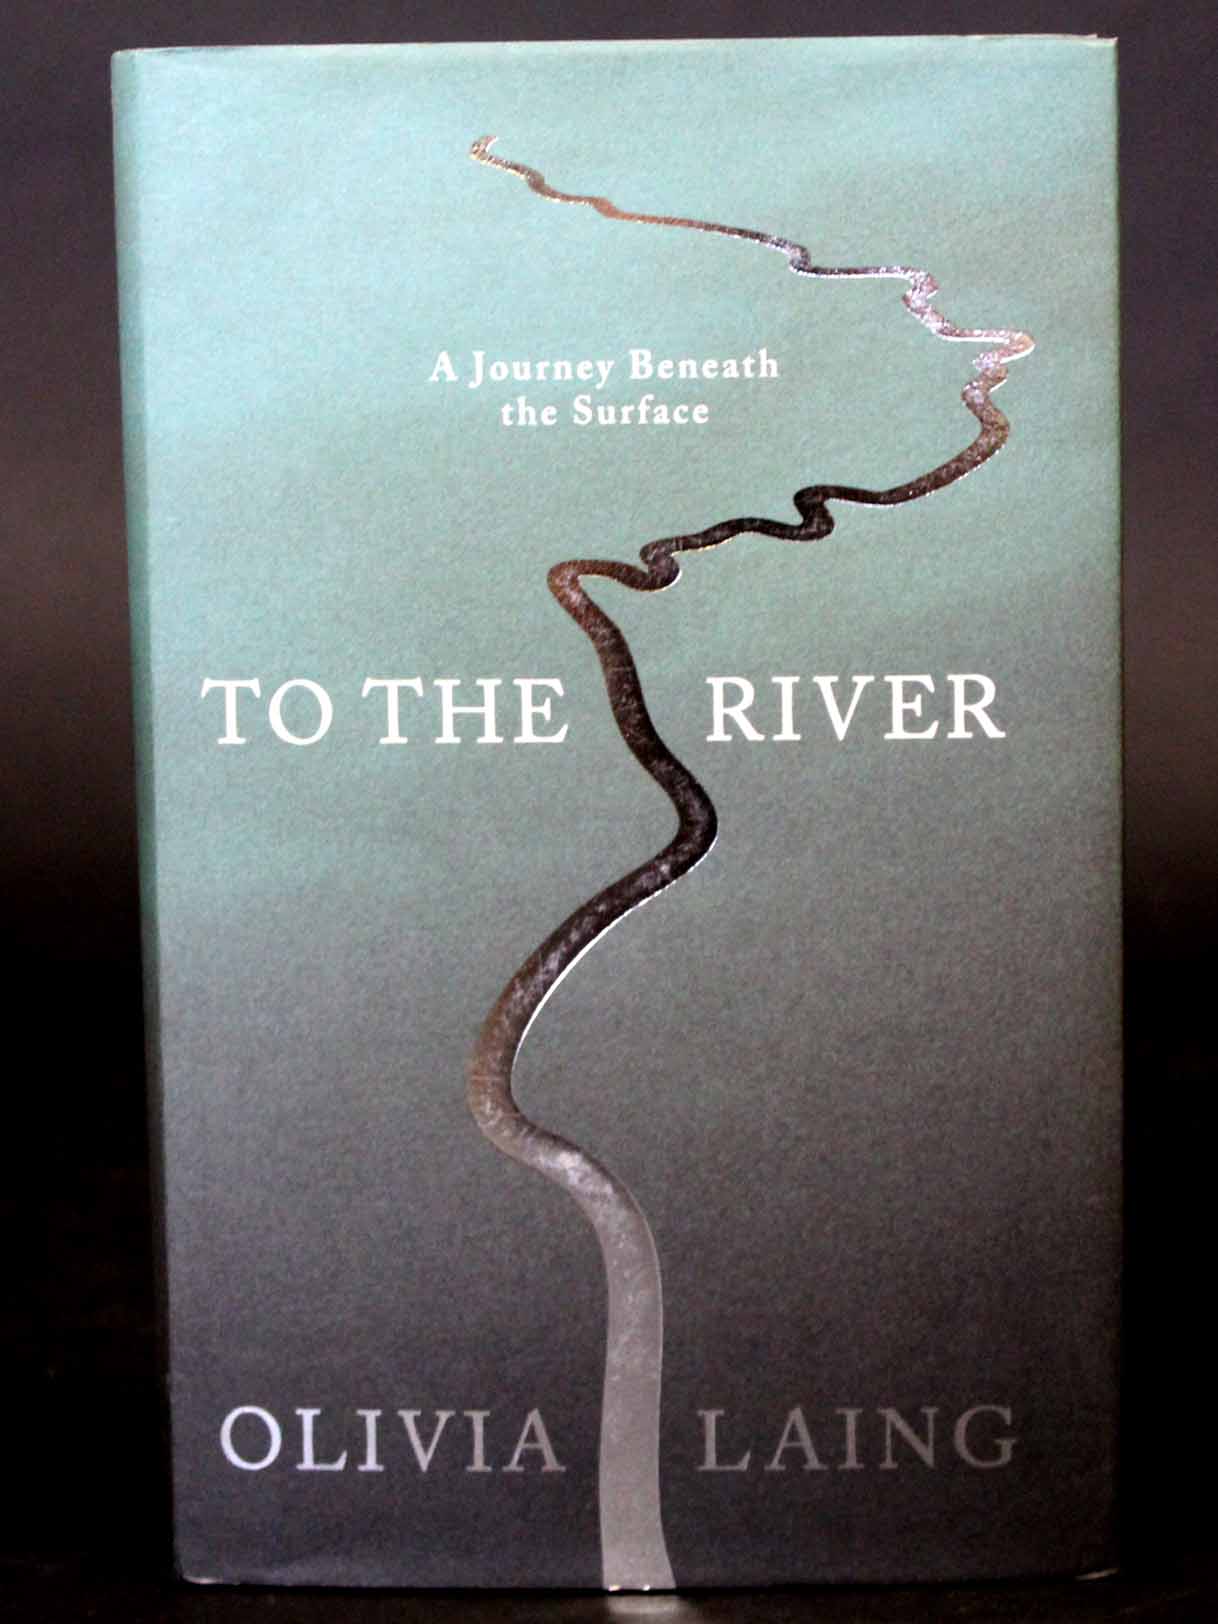 OLIVIA LAING: TO THE RIVER, A JOURNEY BENEATH THE SURFACE, Edinburgh, London, New York and